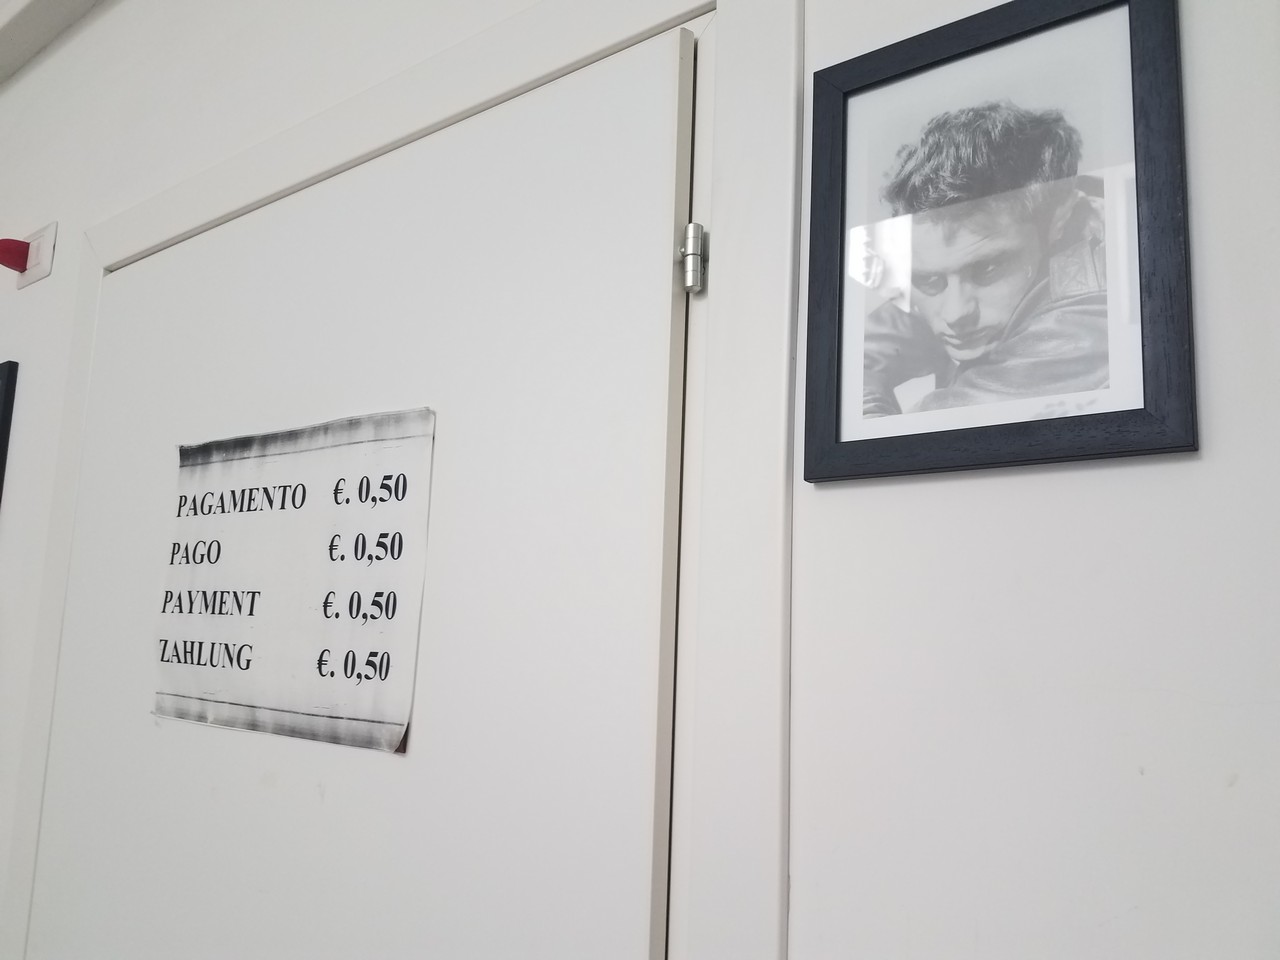 a picture of a man in a black frame on a white wall